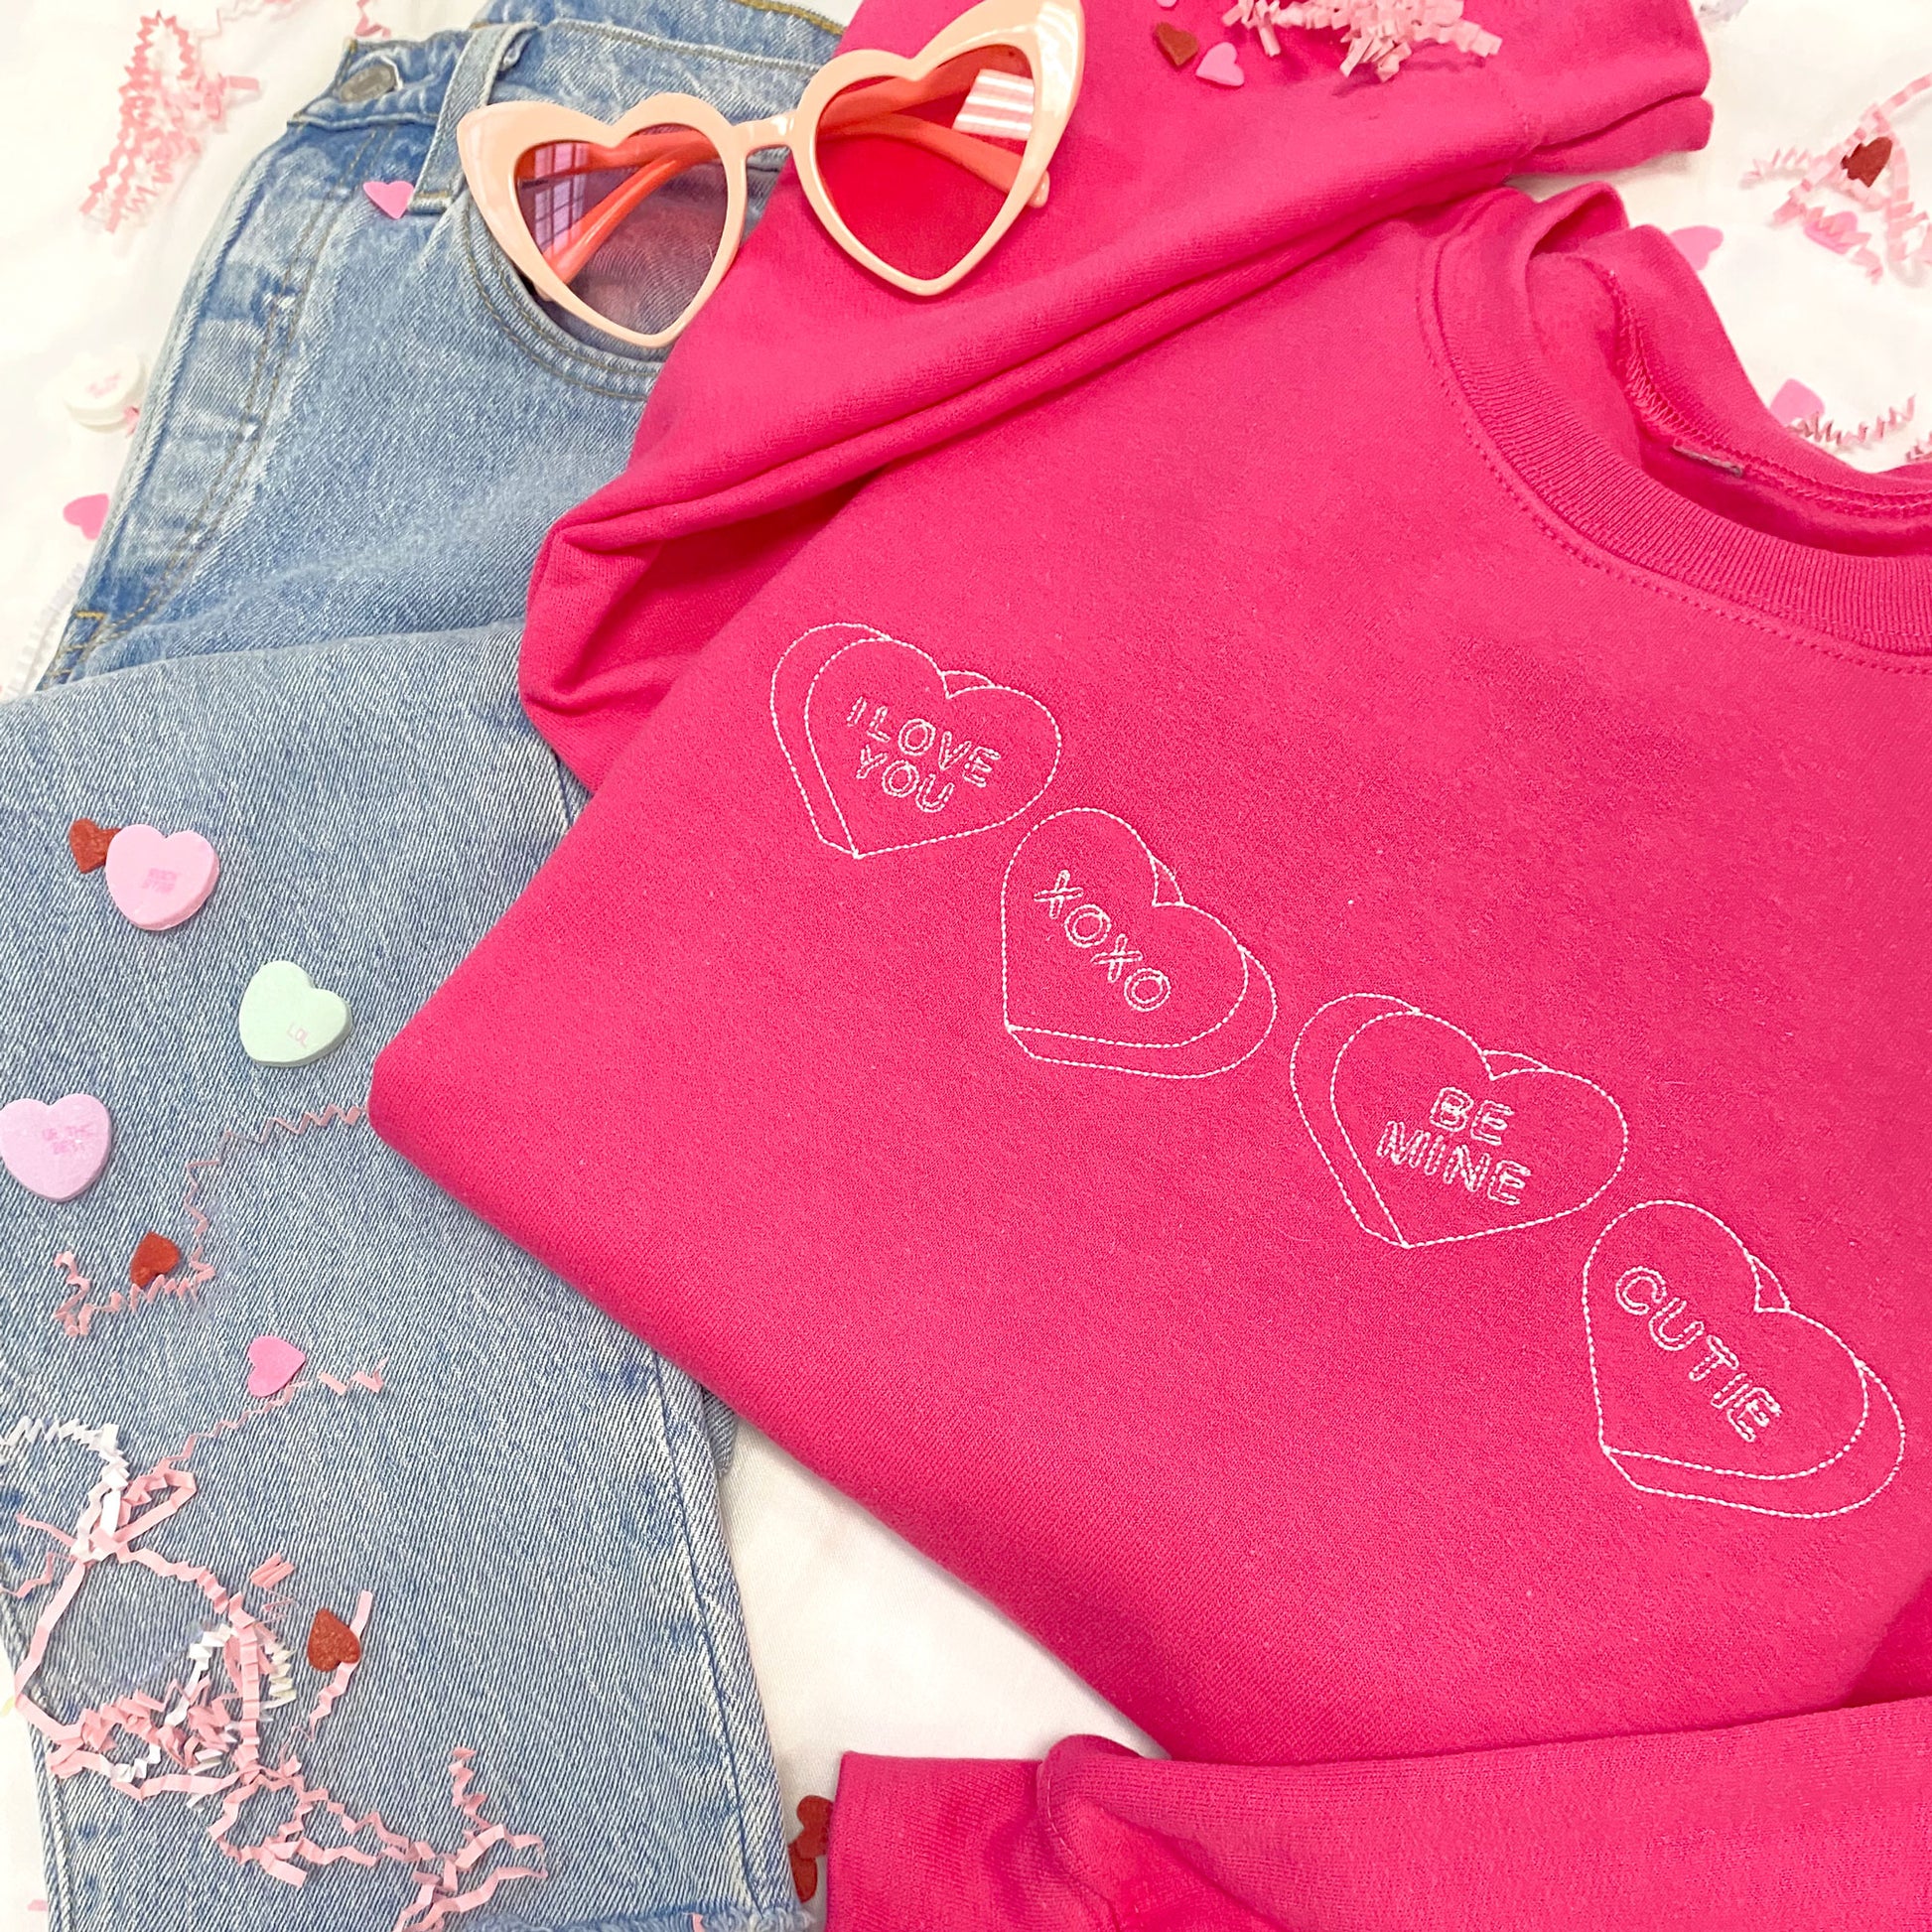 flat lay image of jeans, heart shaped glasses, a bright pink crewneck sweatshirt with stitched candy hearts across the chest  with "I love you," "xoxo," "be mine," and "cutie" designs